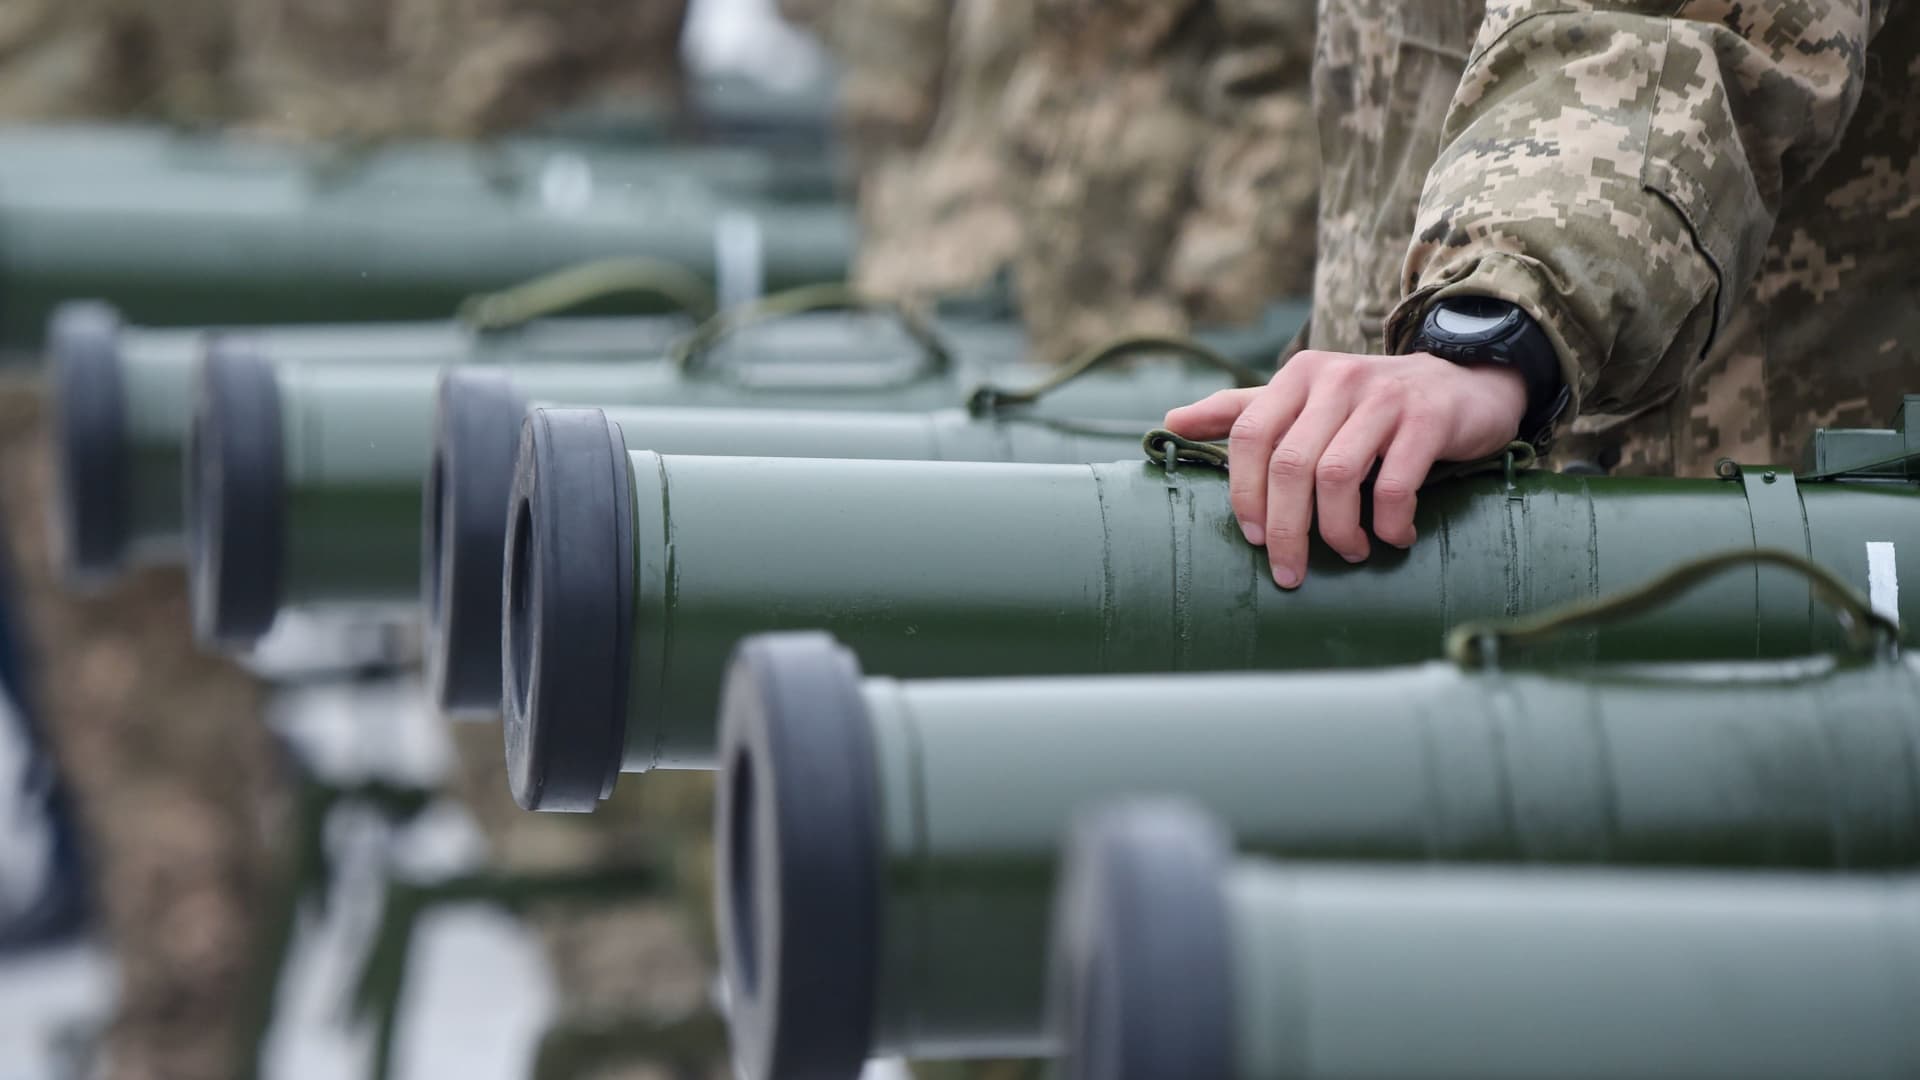 Ukrainian servicemen taking part in the armed conflict with Russia-backed separatists in Donetsk region of the country attend the handover ceremony of military heavy weapons and equipment in Kiev on November 15, 2018.